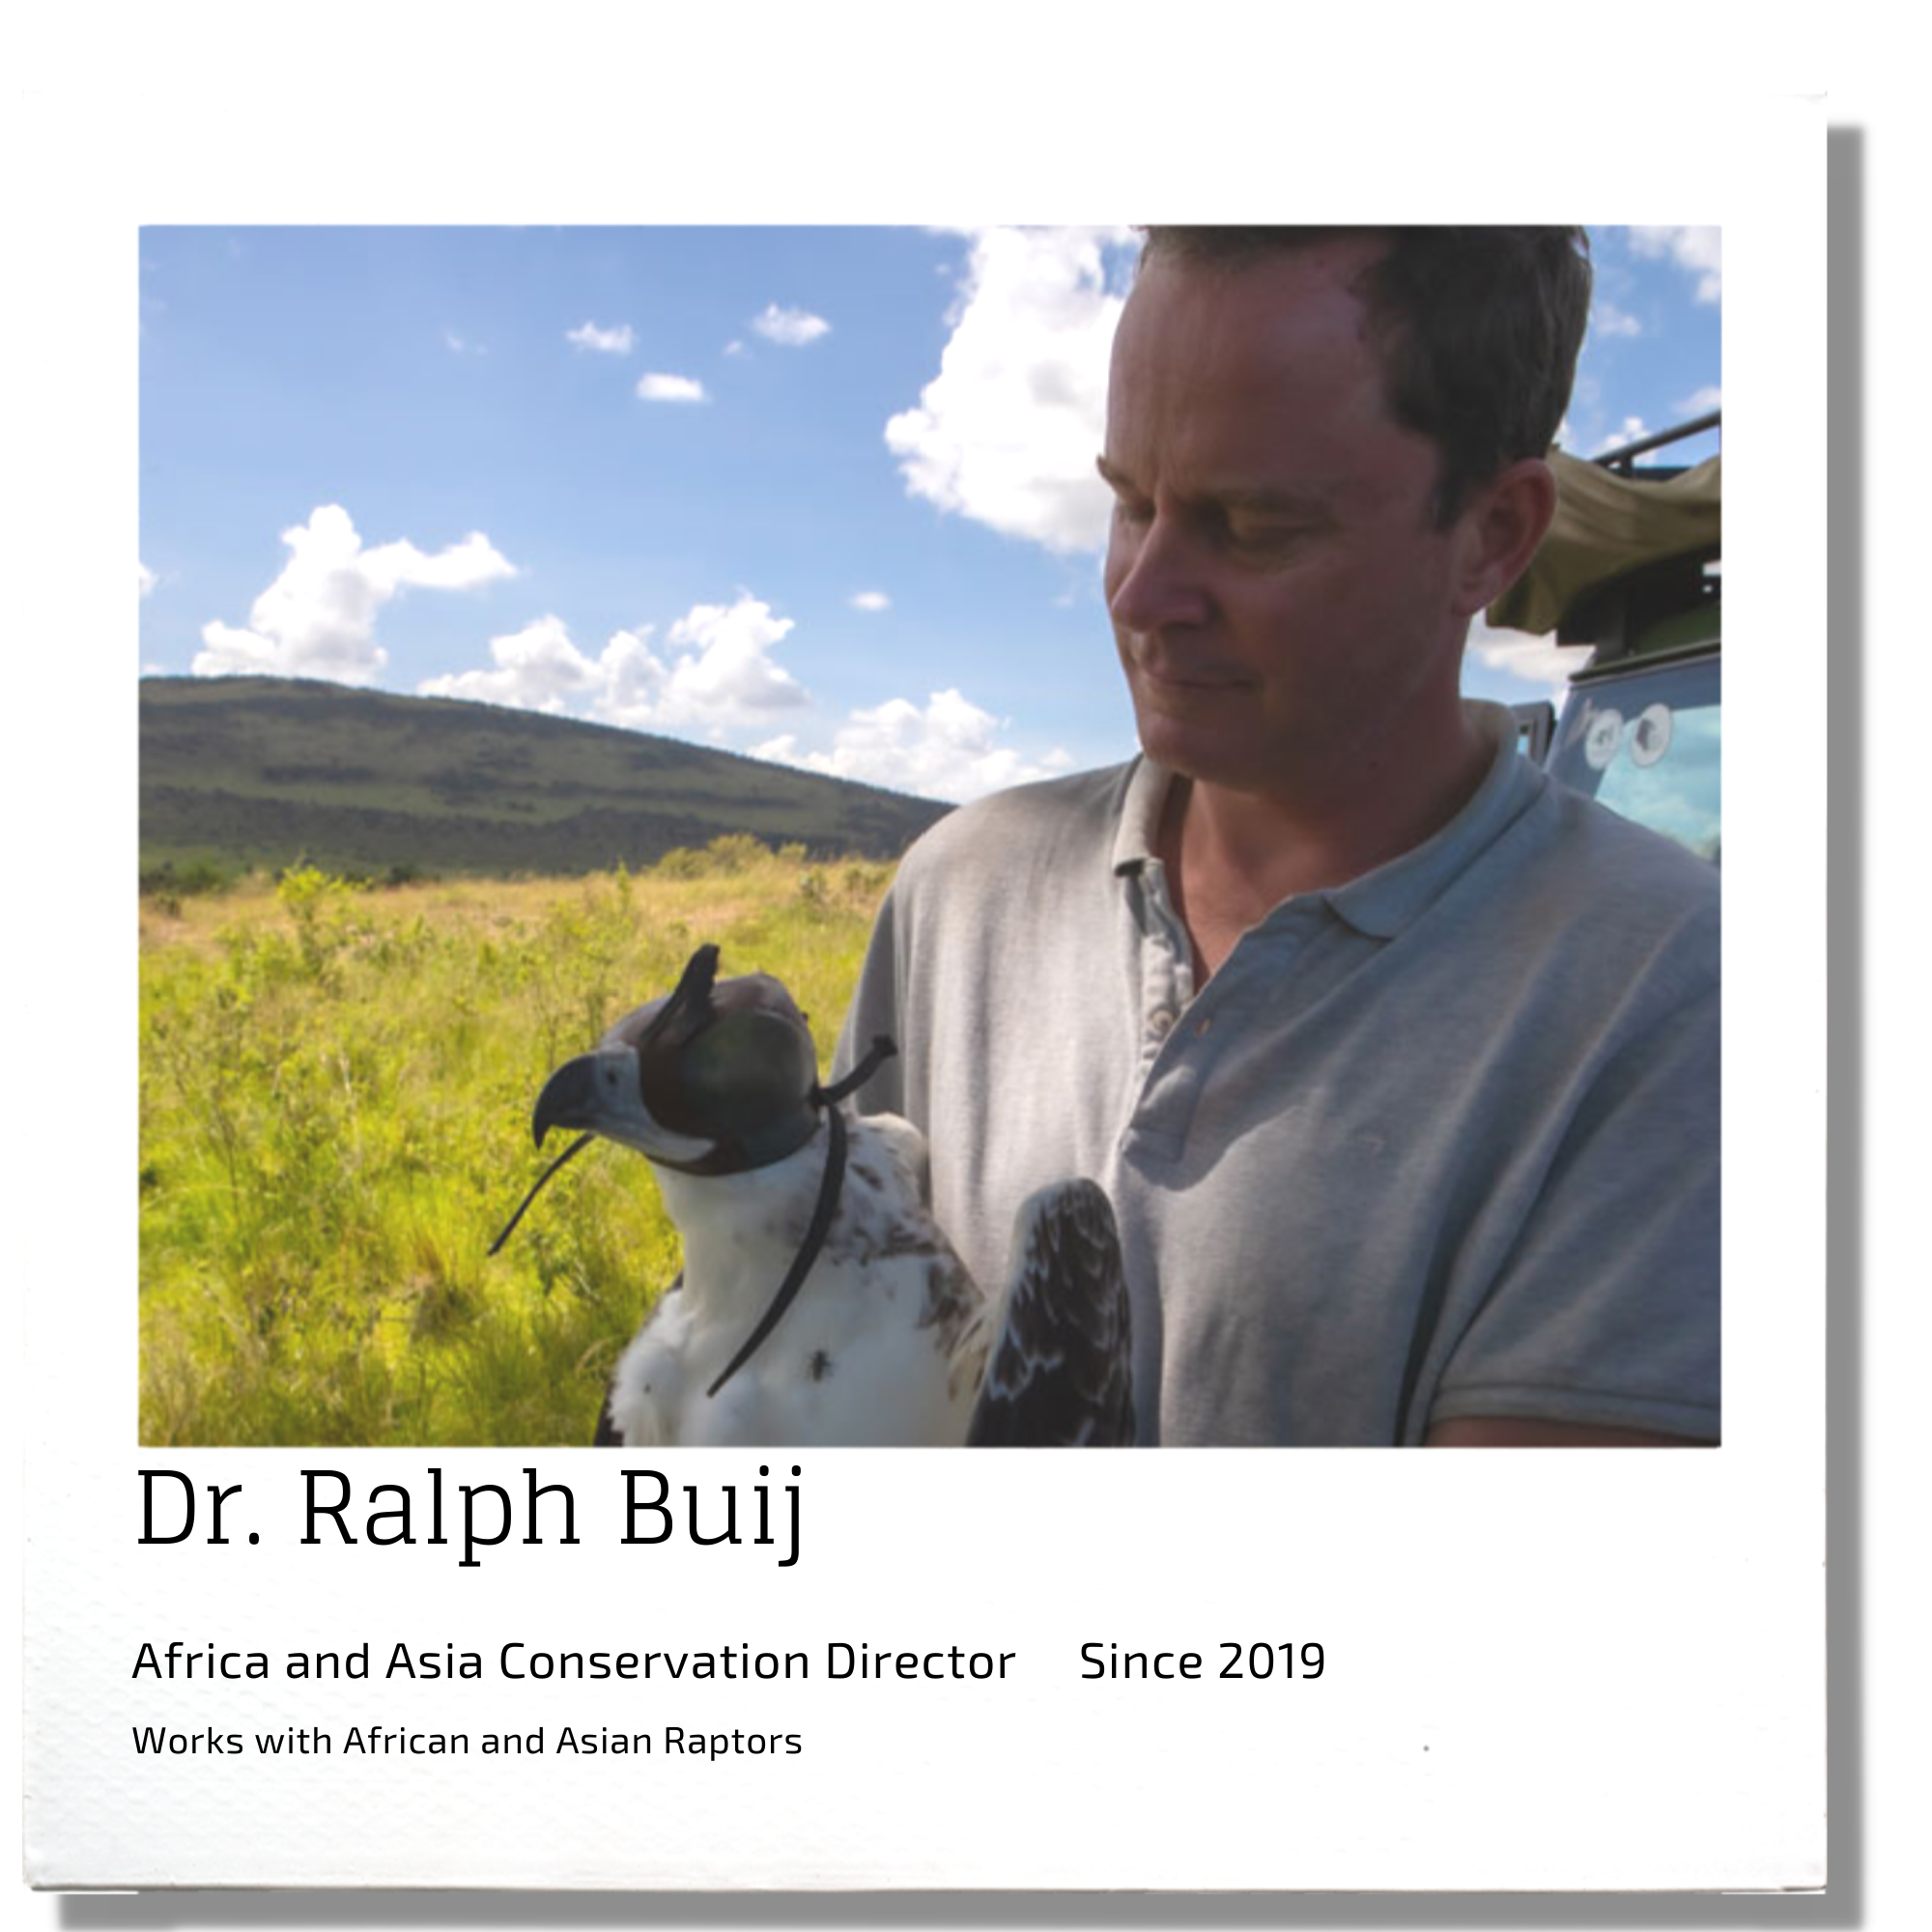 Dr. Ralph Buij, Africa and Asia Conservation Director